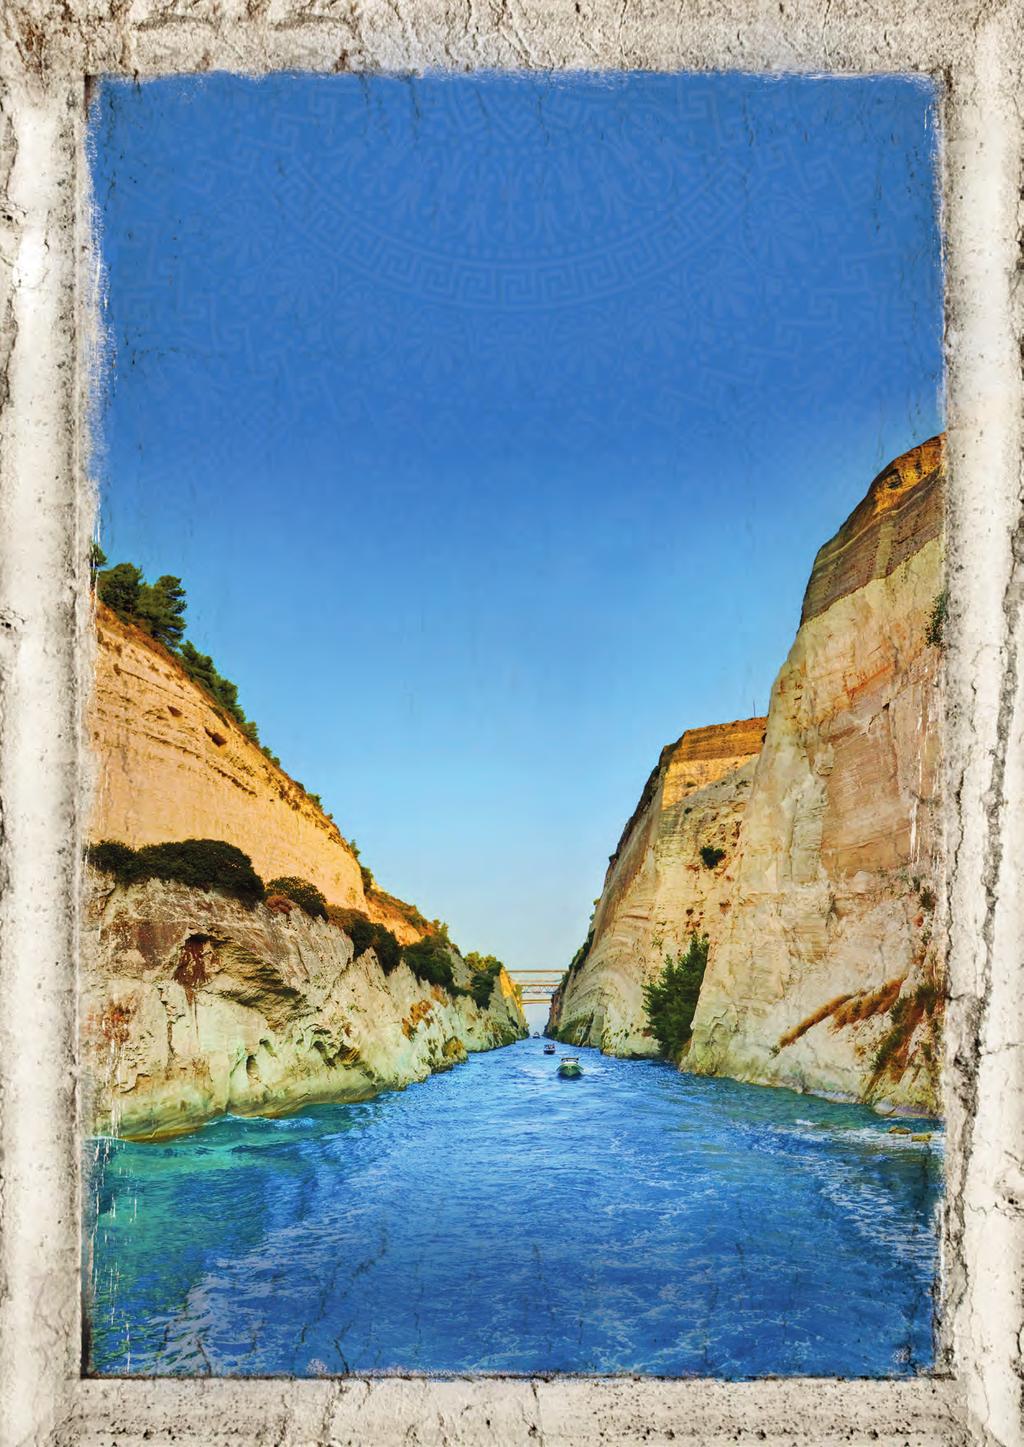 CORINTH CANAL Record-breaking sailing of the Corinth